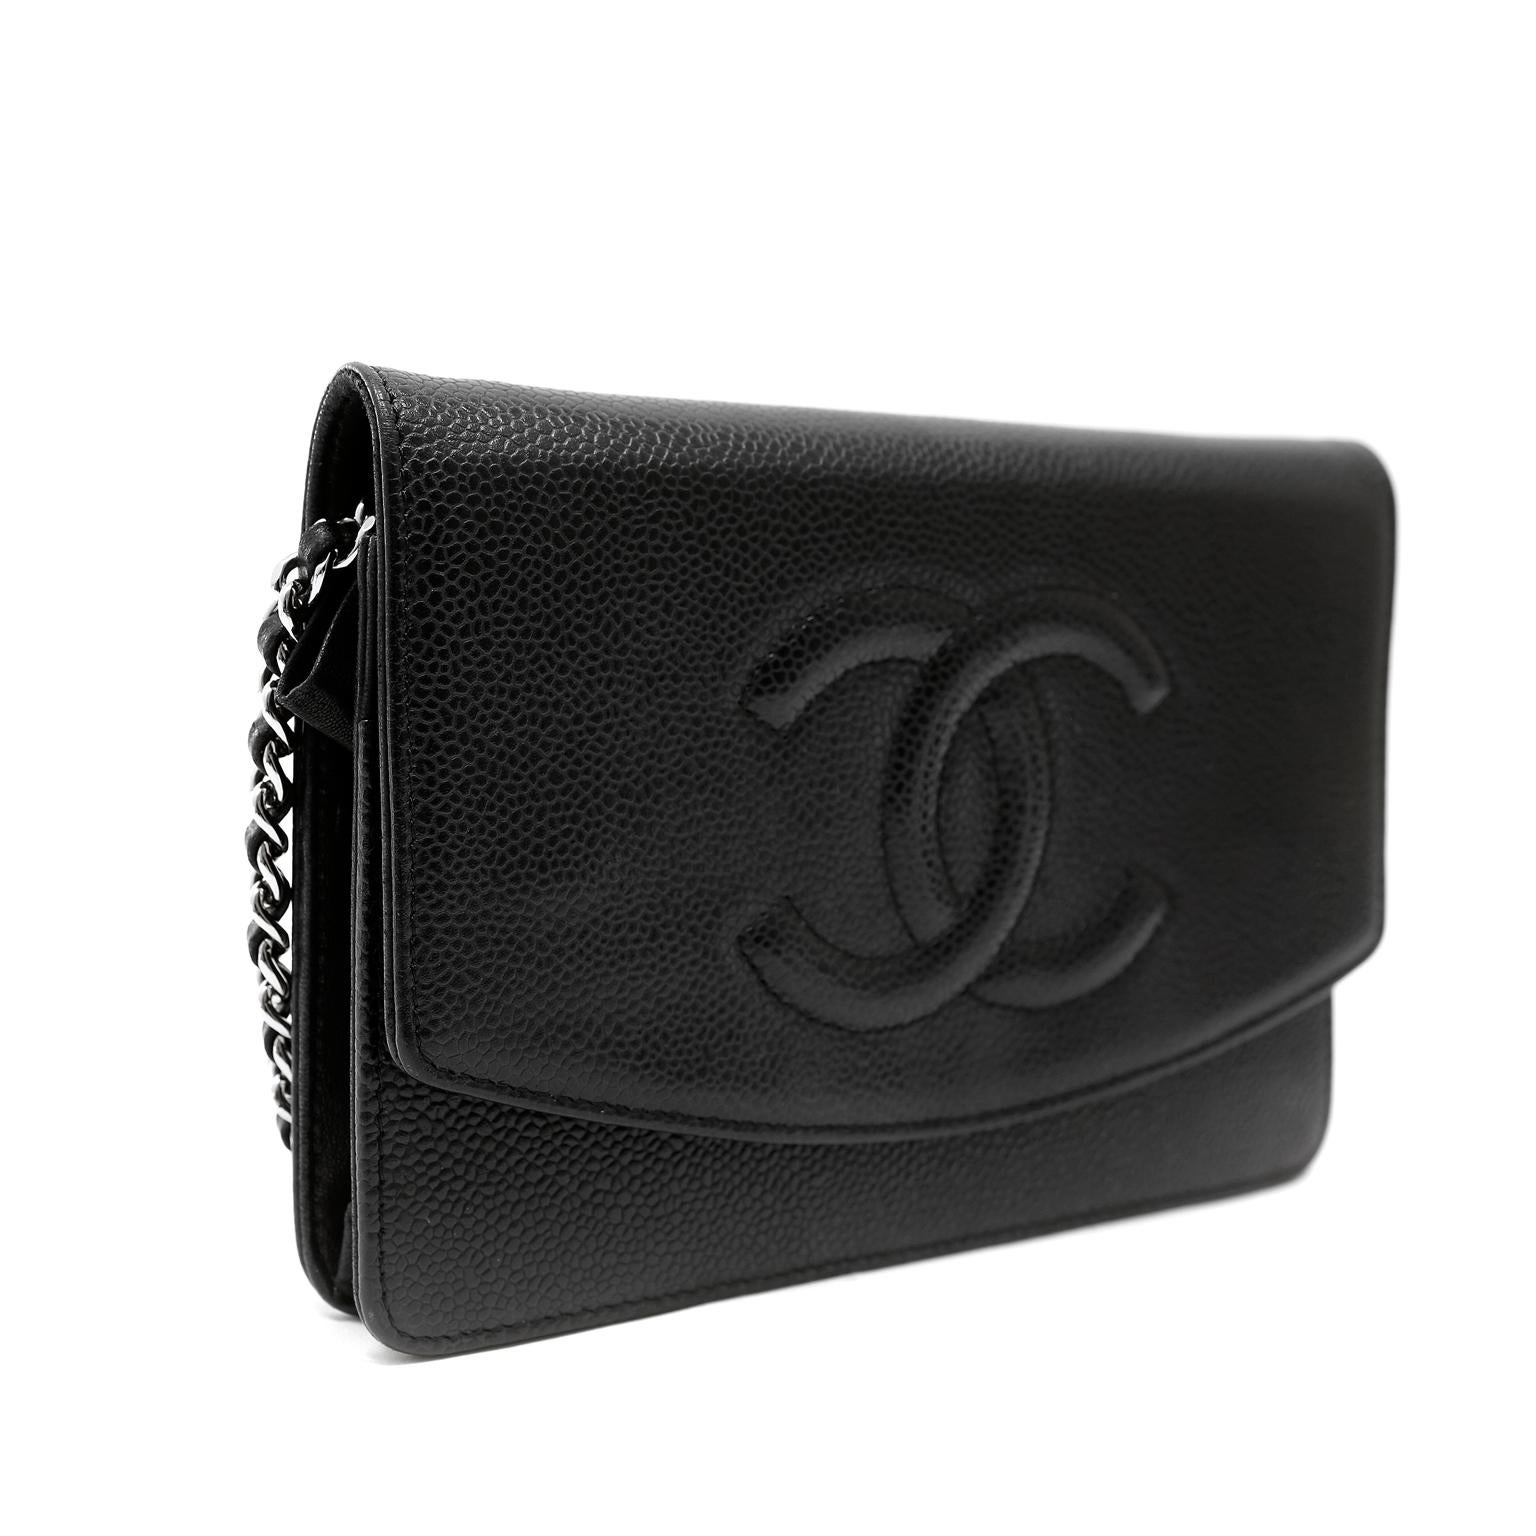 Chanel Black Caviar Timeless Wallet on a Chain with Silver 3